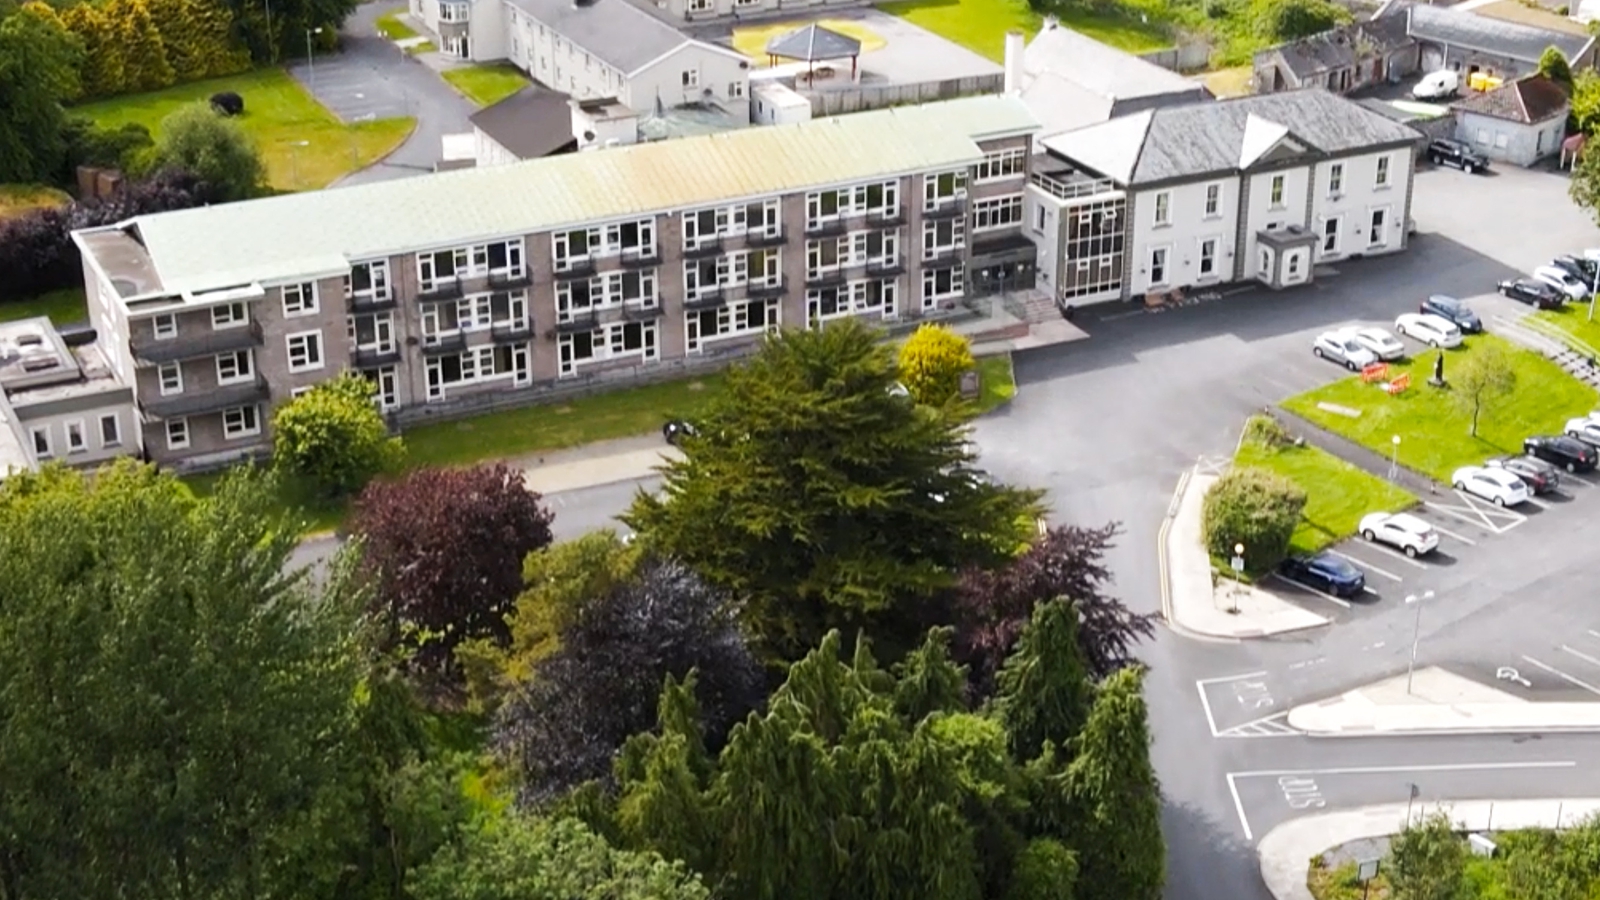 Image - Cahercalla nursing home has since implemented a new management structure